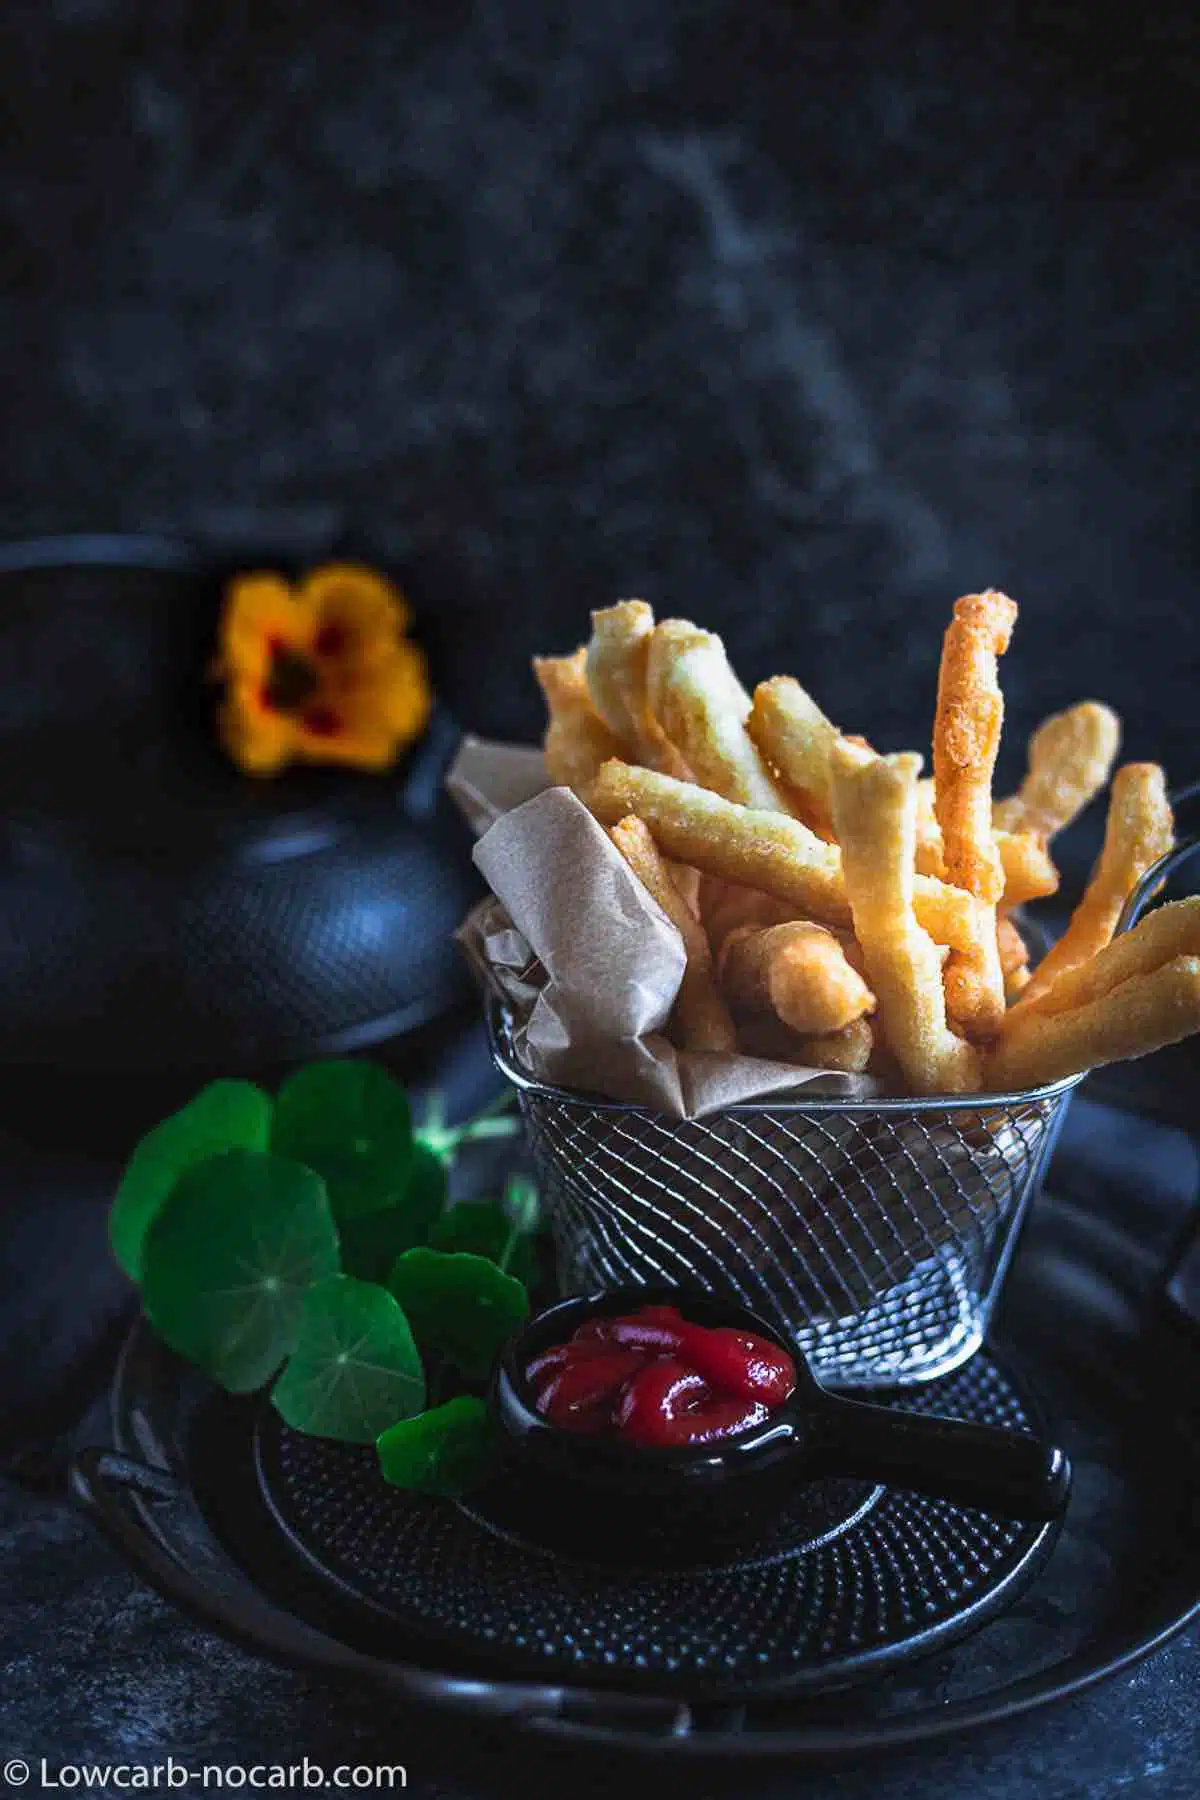 French Fries with minimum carbs in a metal basket